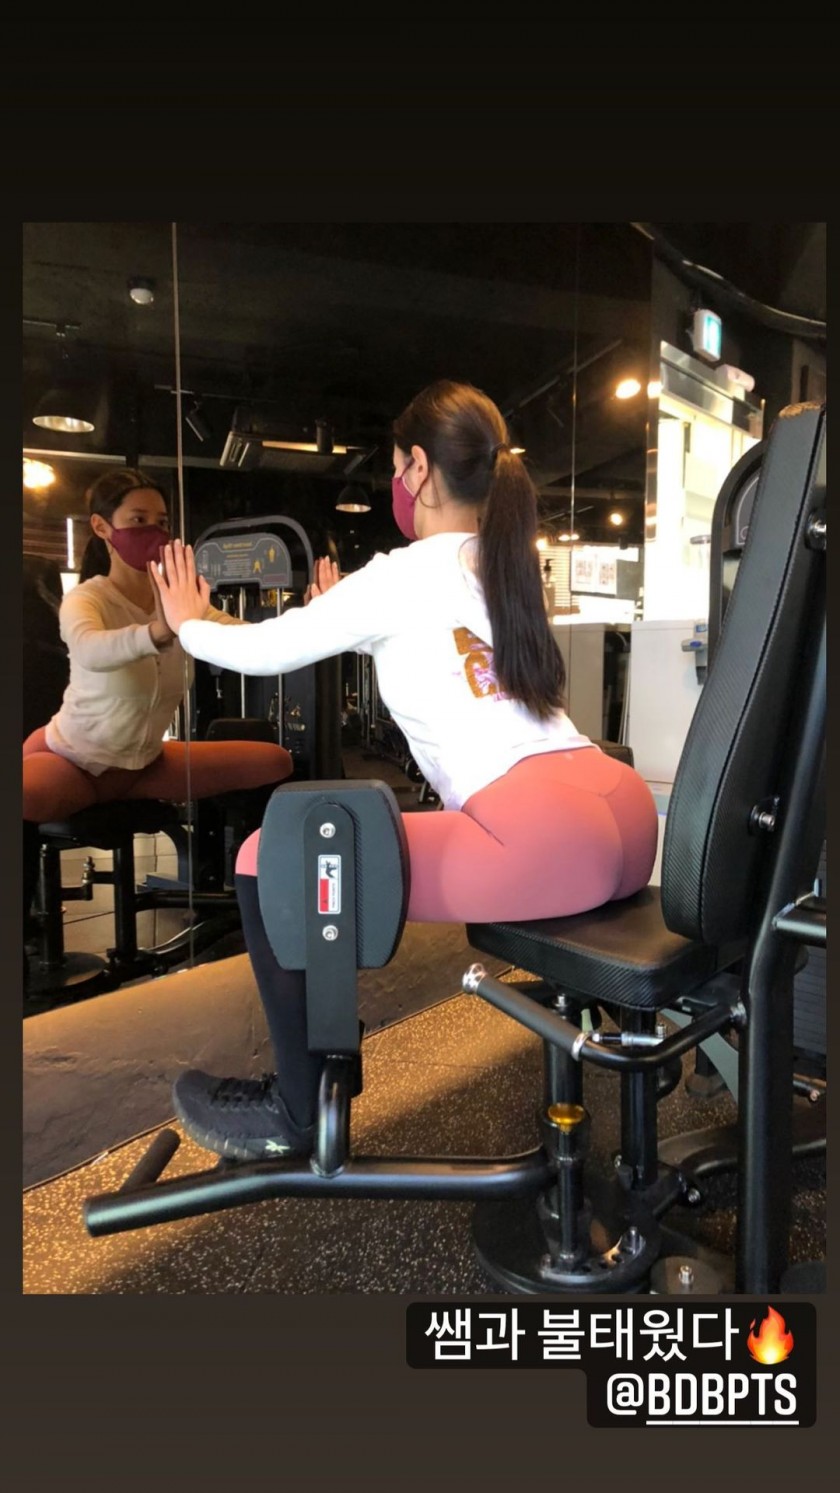 Pink leggings that enjoy exercising. Stretching posture. Chohyun's angry butt.